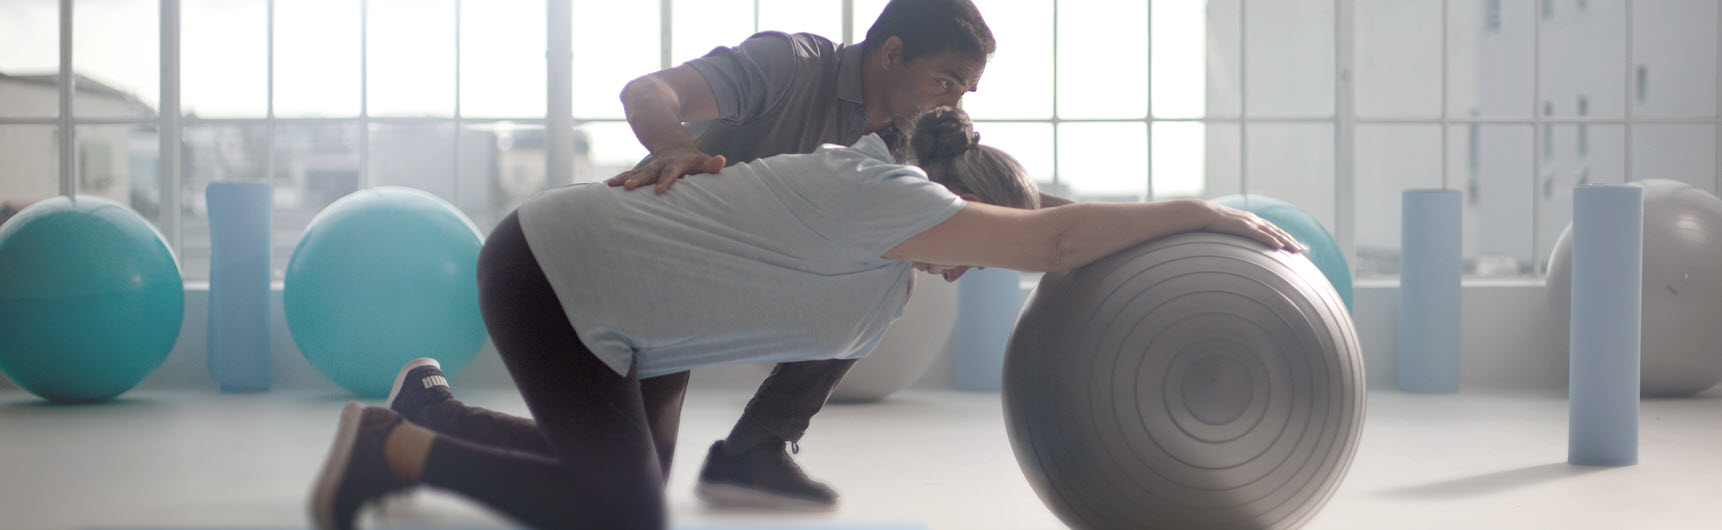 An instructor coaching a patient through physical rehabilitation